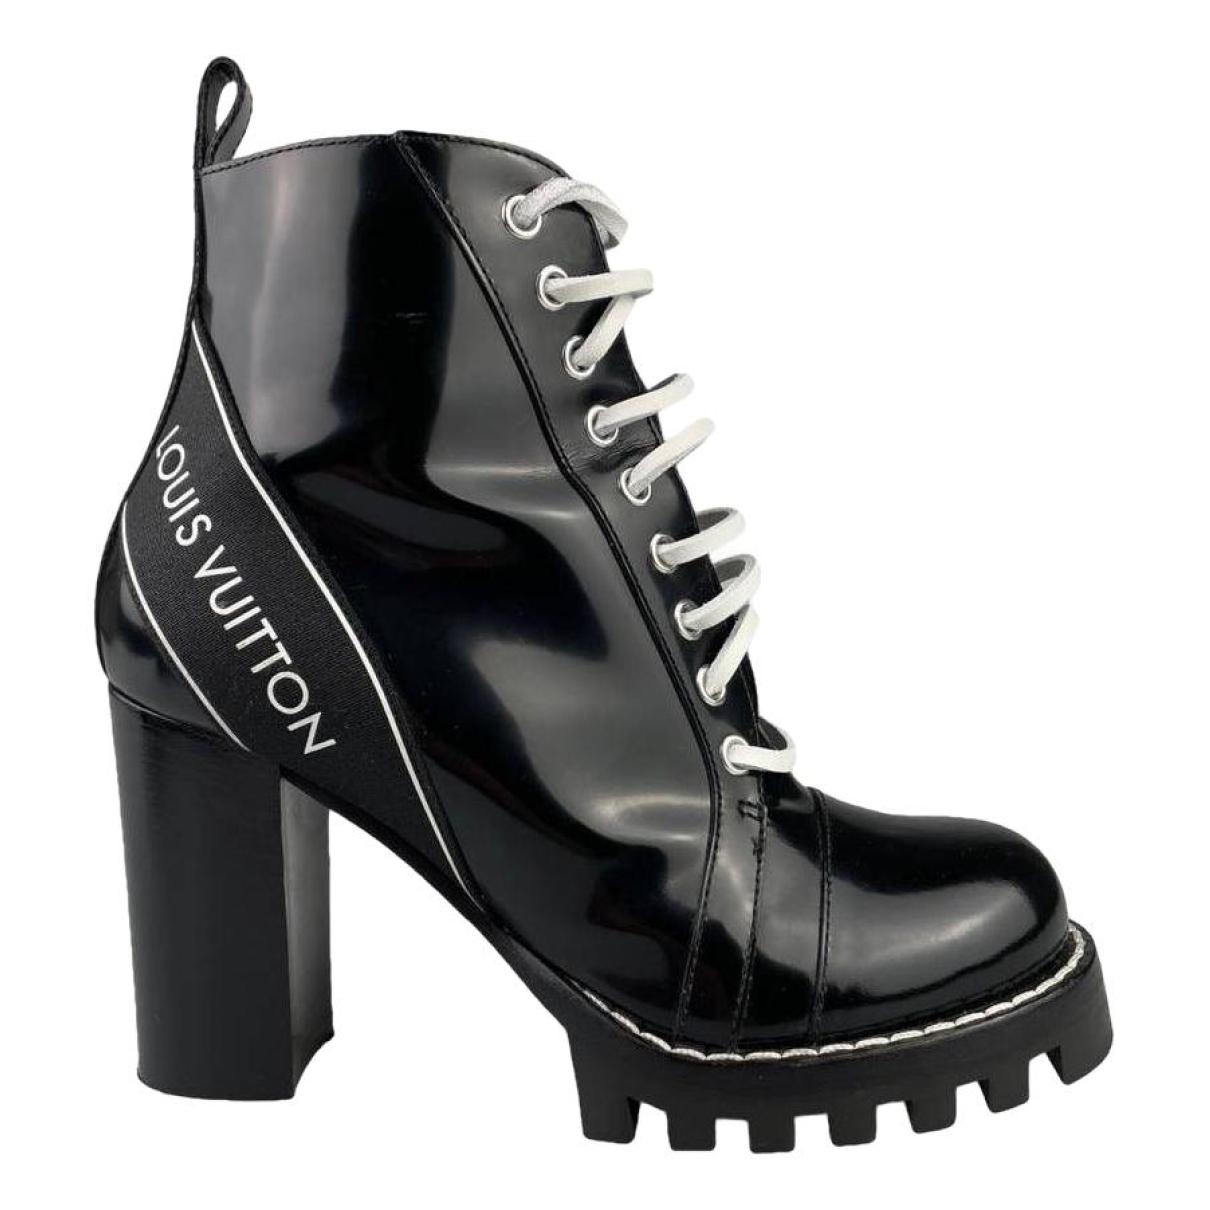 Star Trail Ankle Boots - Shoes 1AB2XW